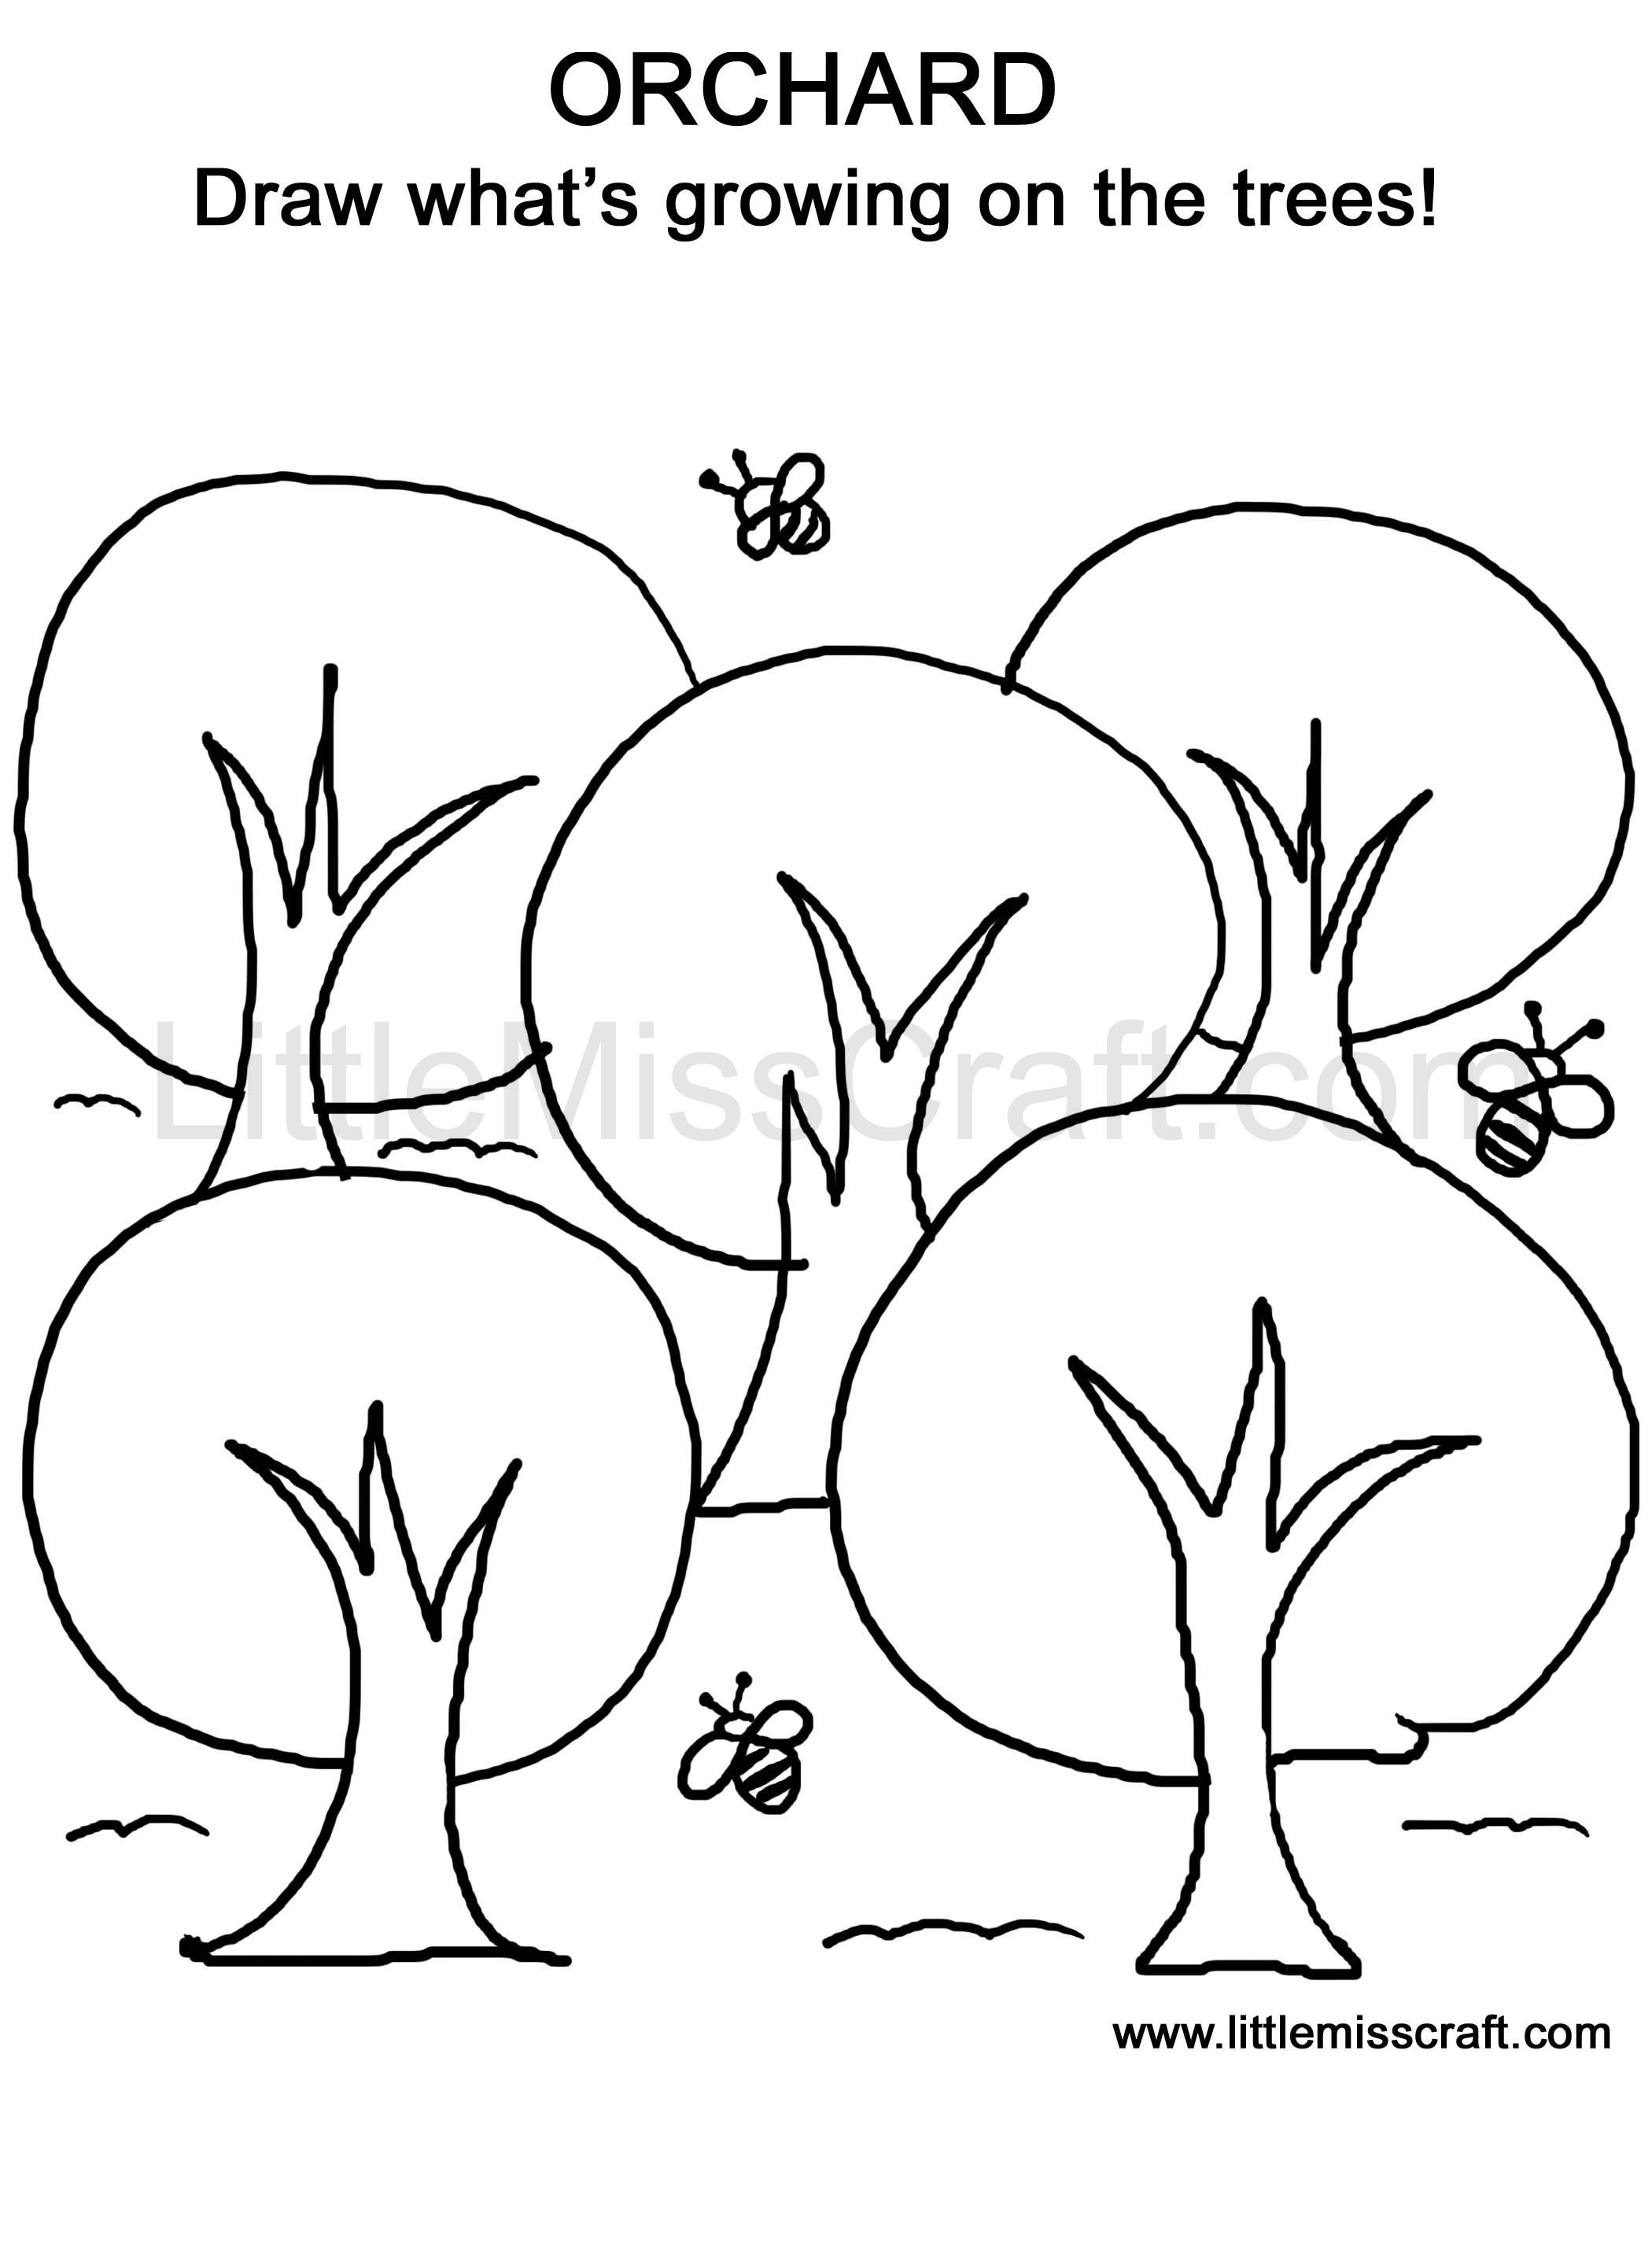 Orchard Doodle Coloring Page